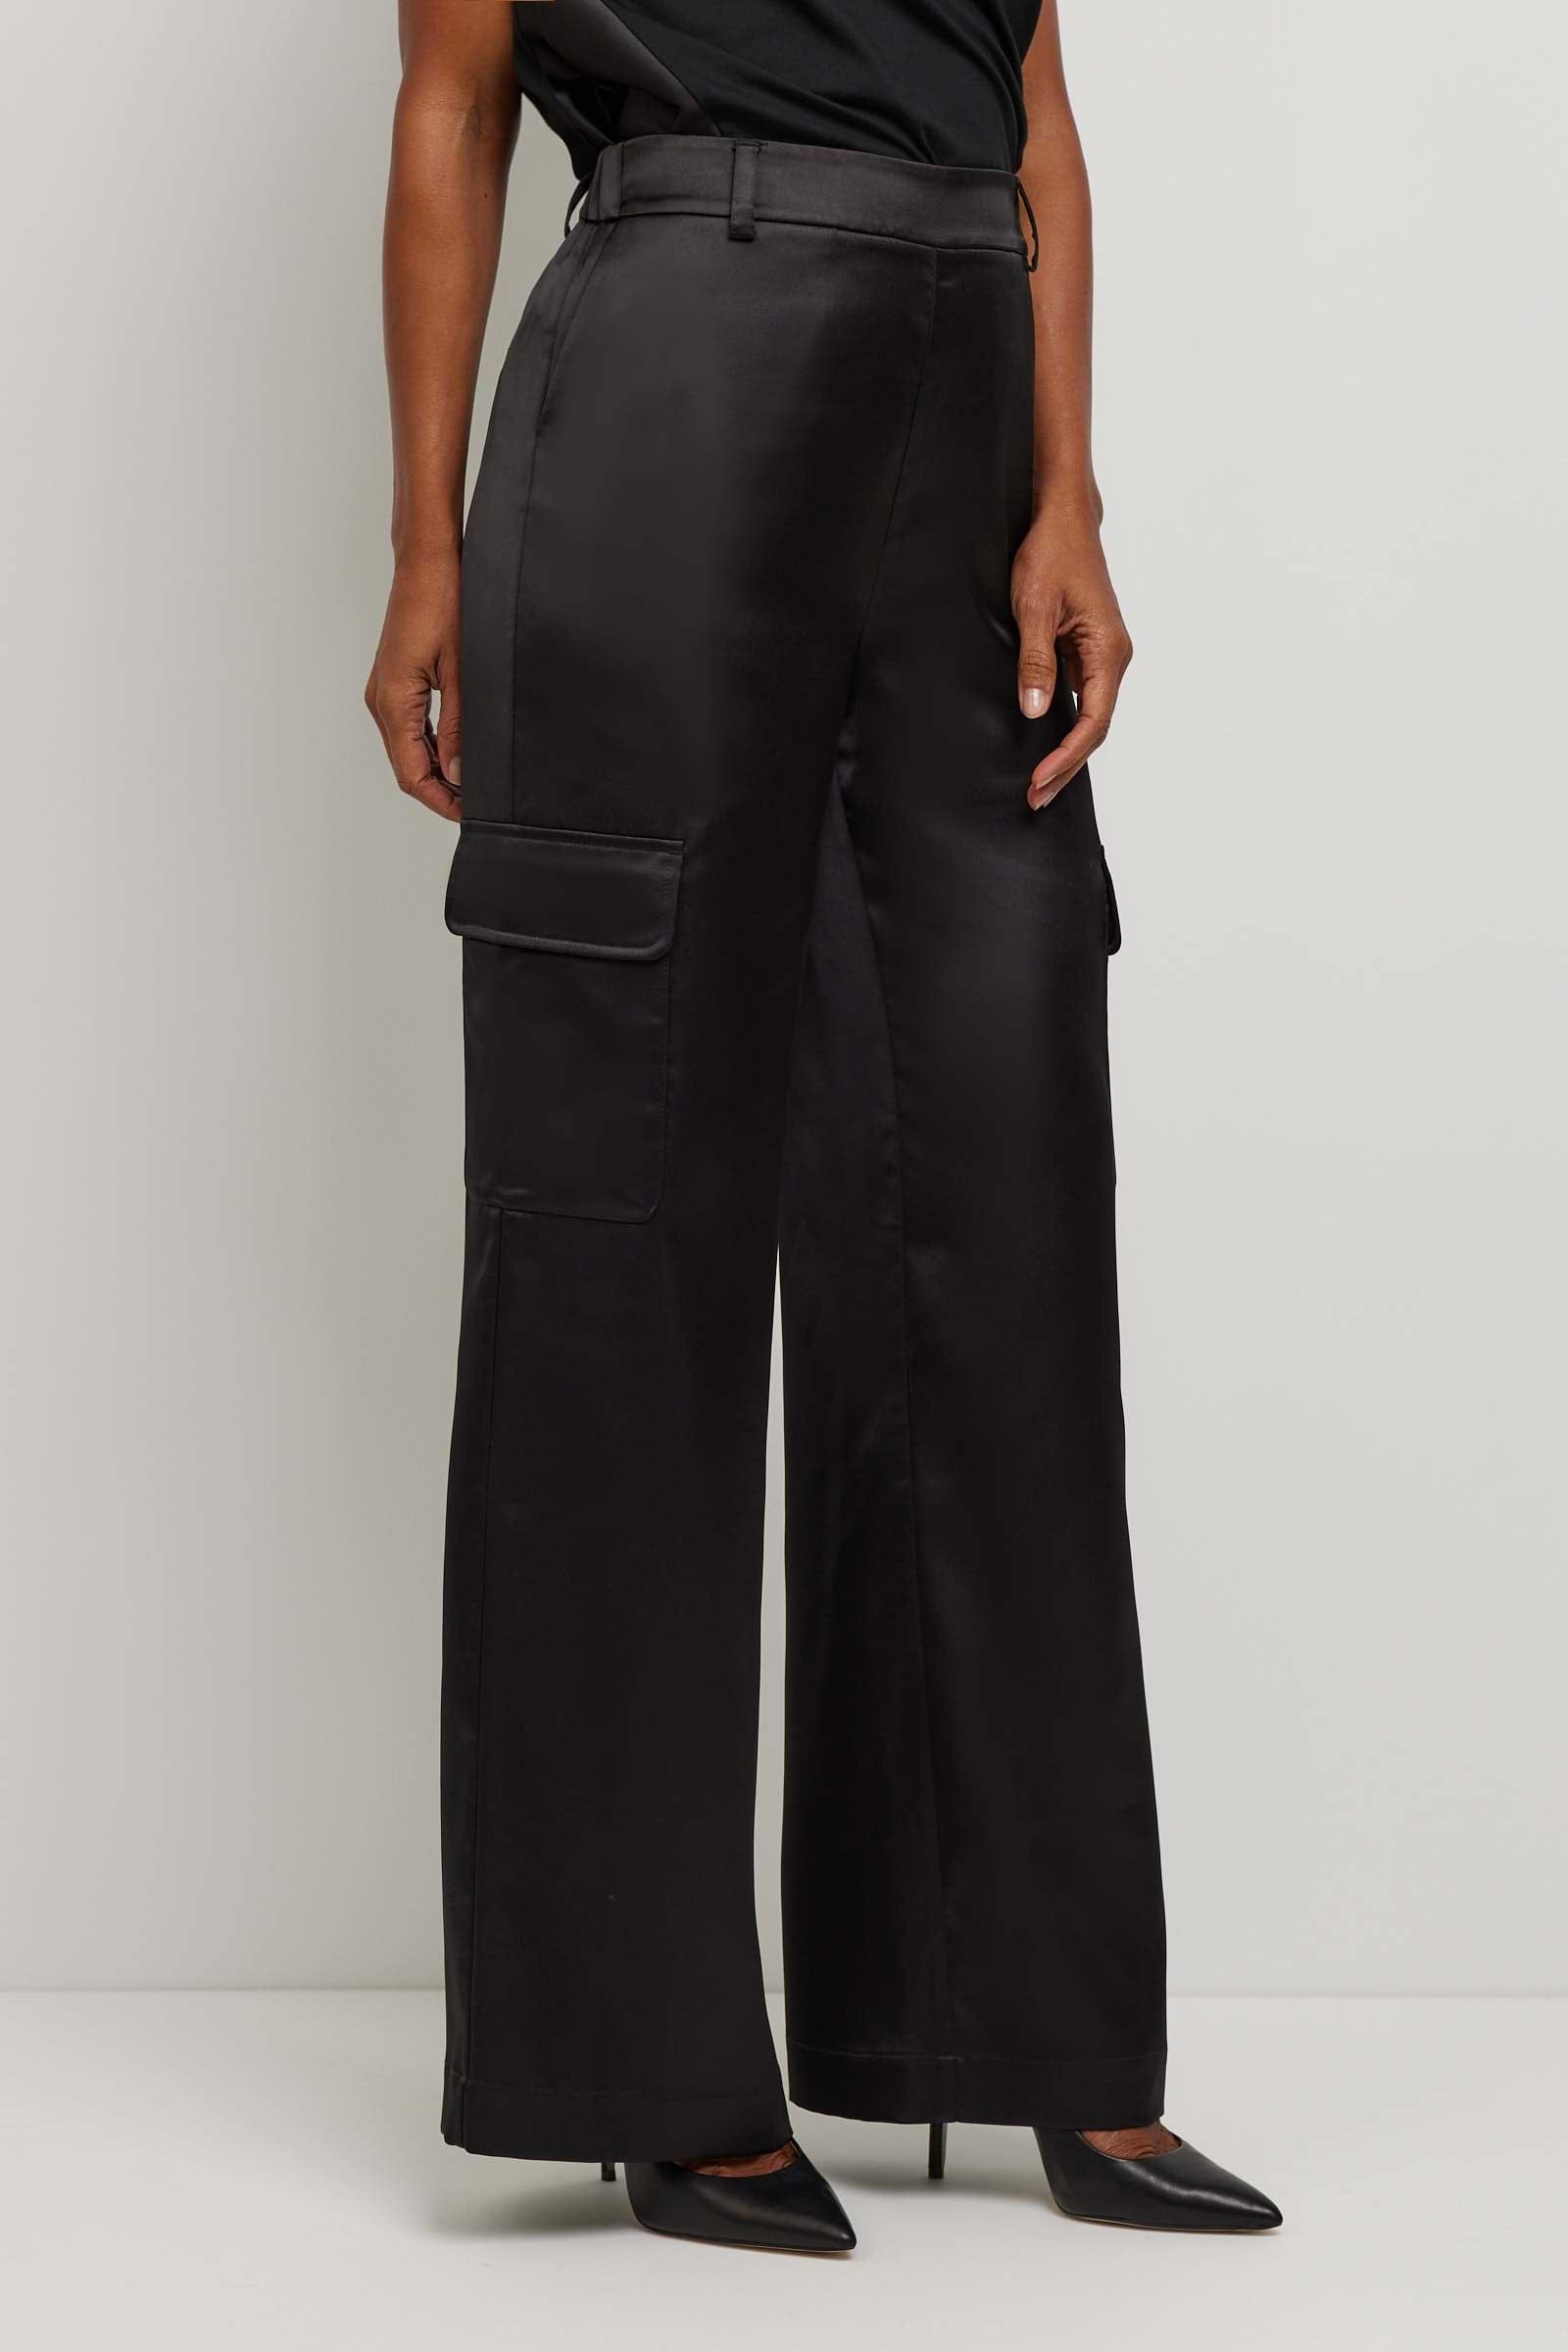 The Best Travel Pant. Side Profile of a Candela Satin Pant in Black.